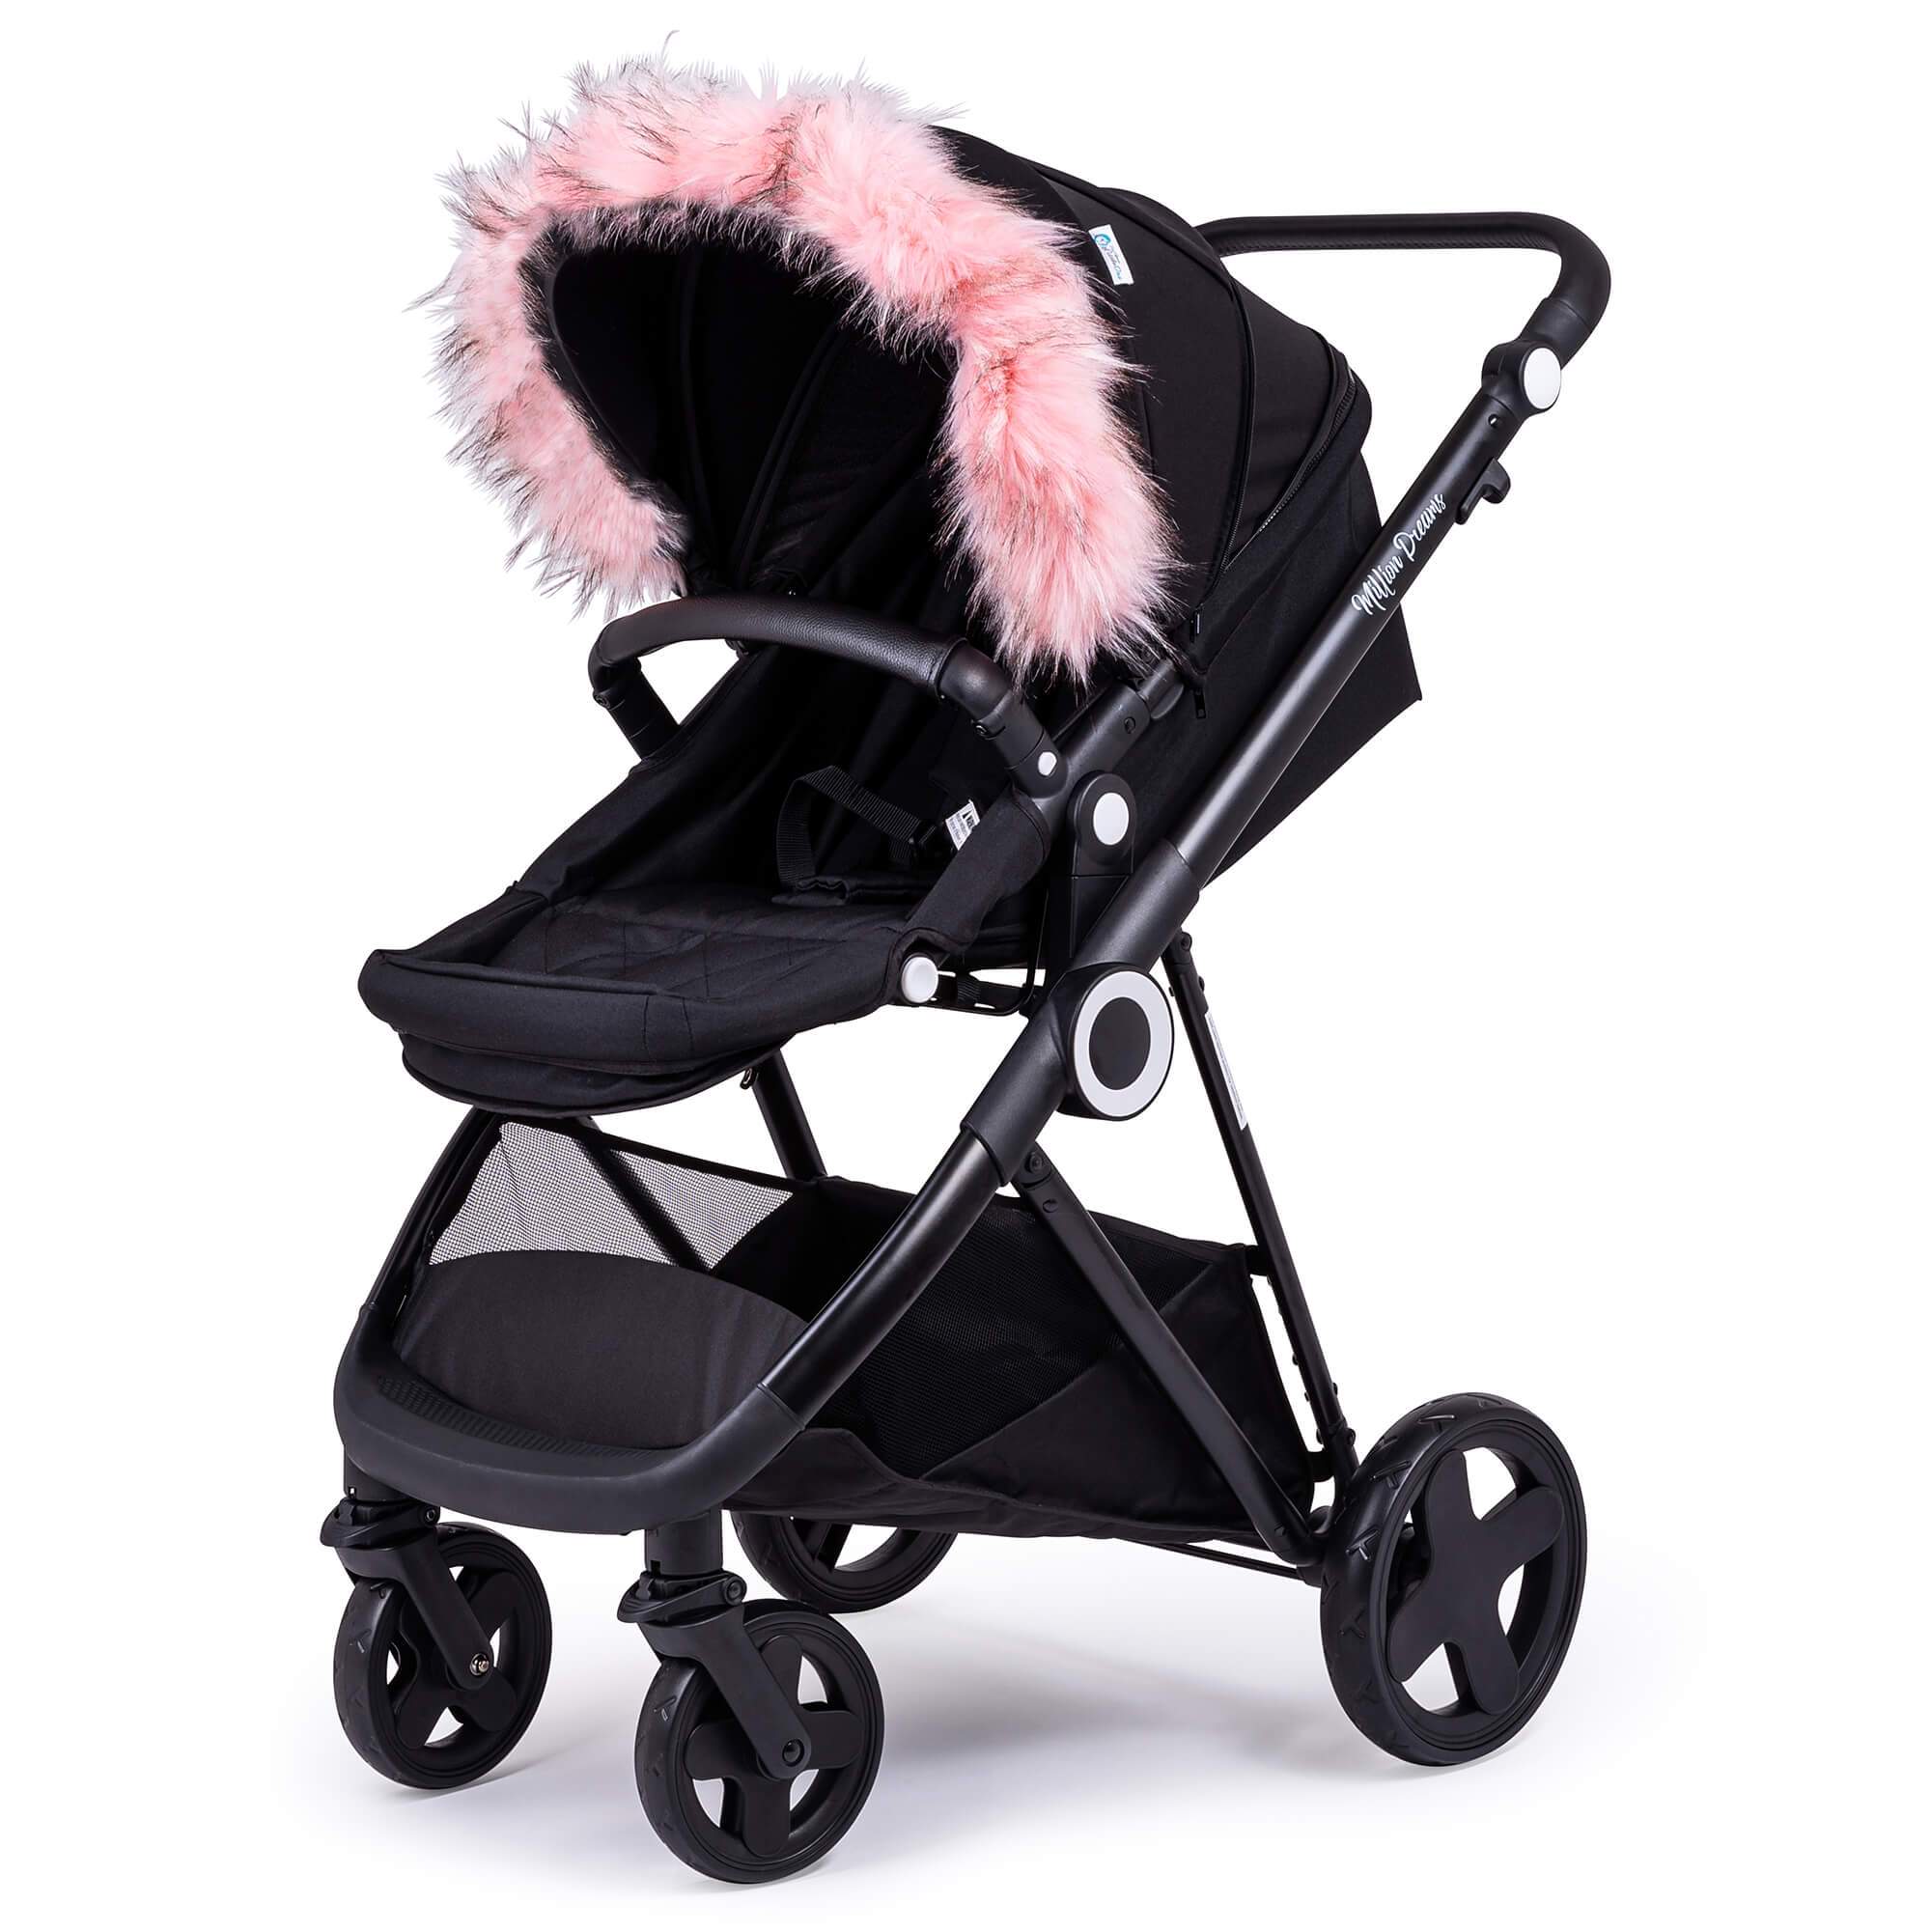 Pram Fur Hood Trim Attachment for Pushchair Compatible with Phil & Teds - Light Pink / Fits All Models | For Your Little One